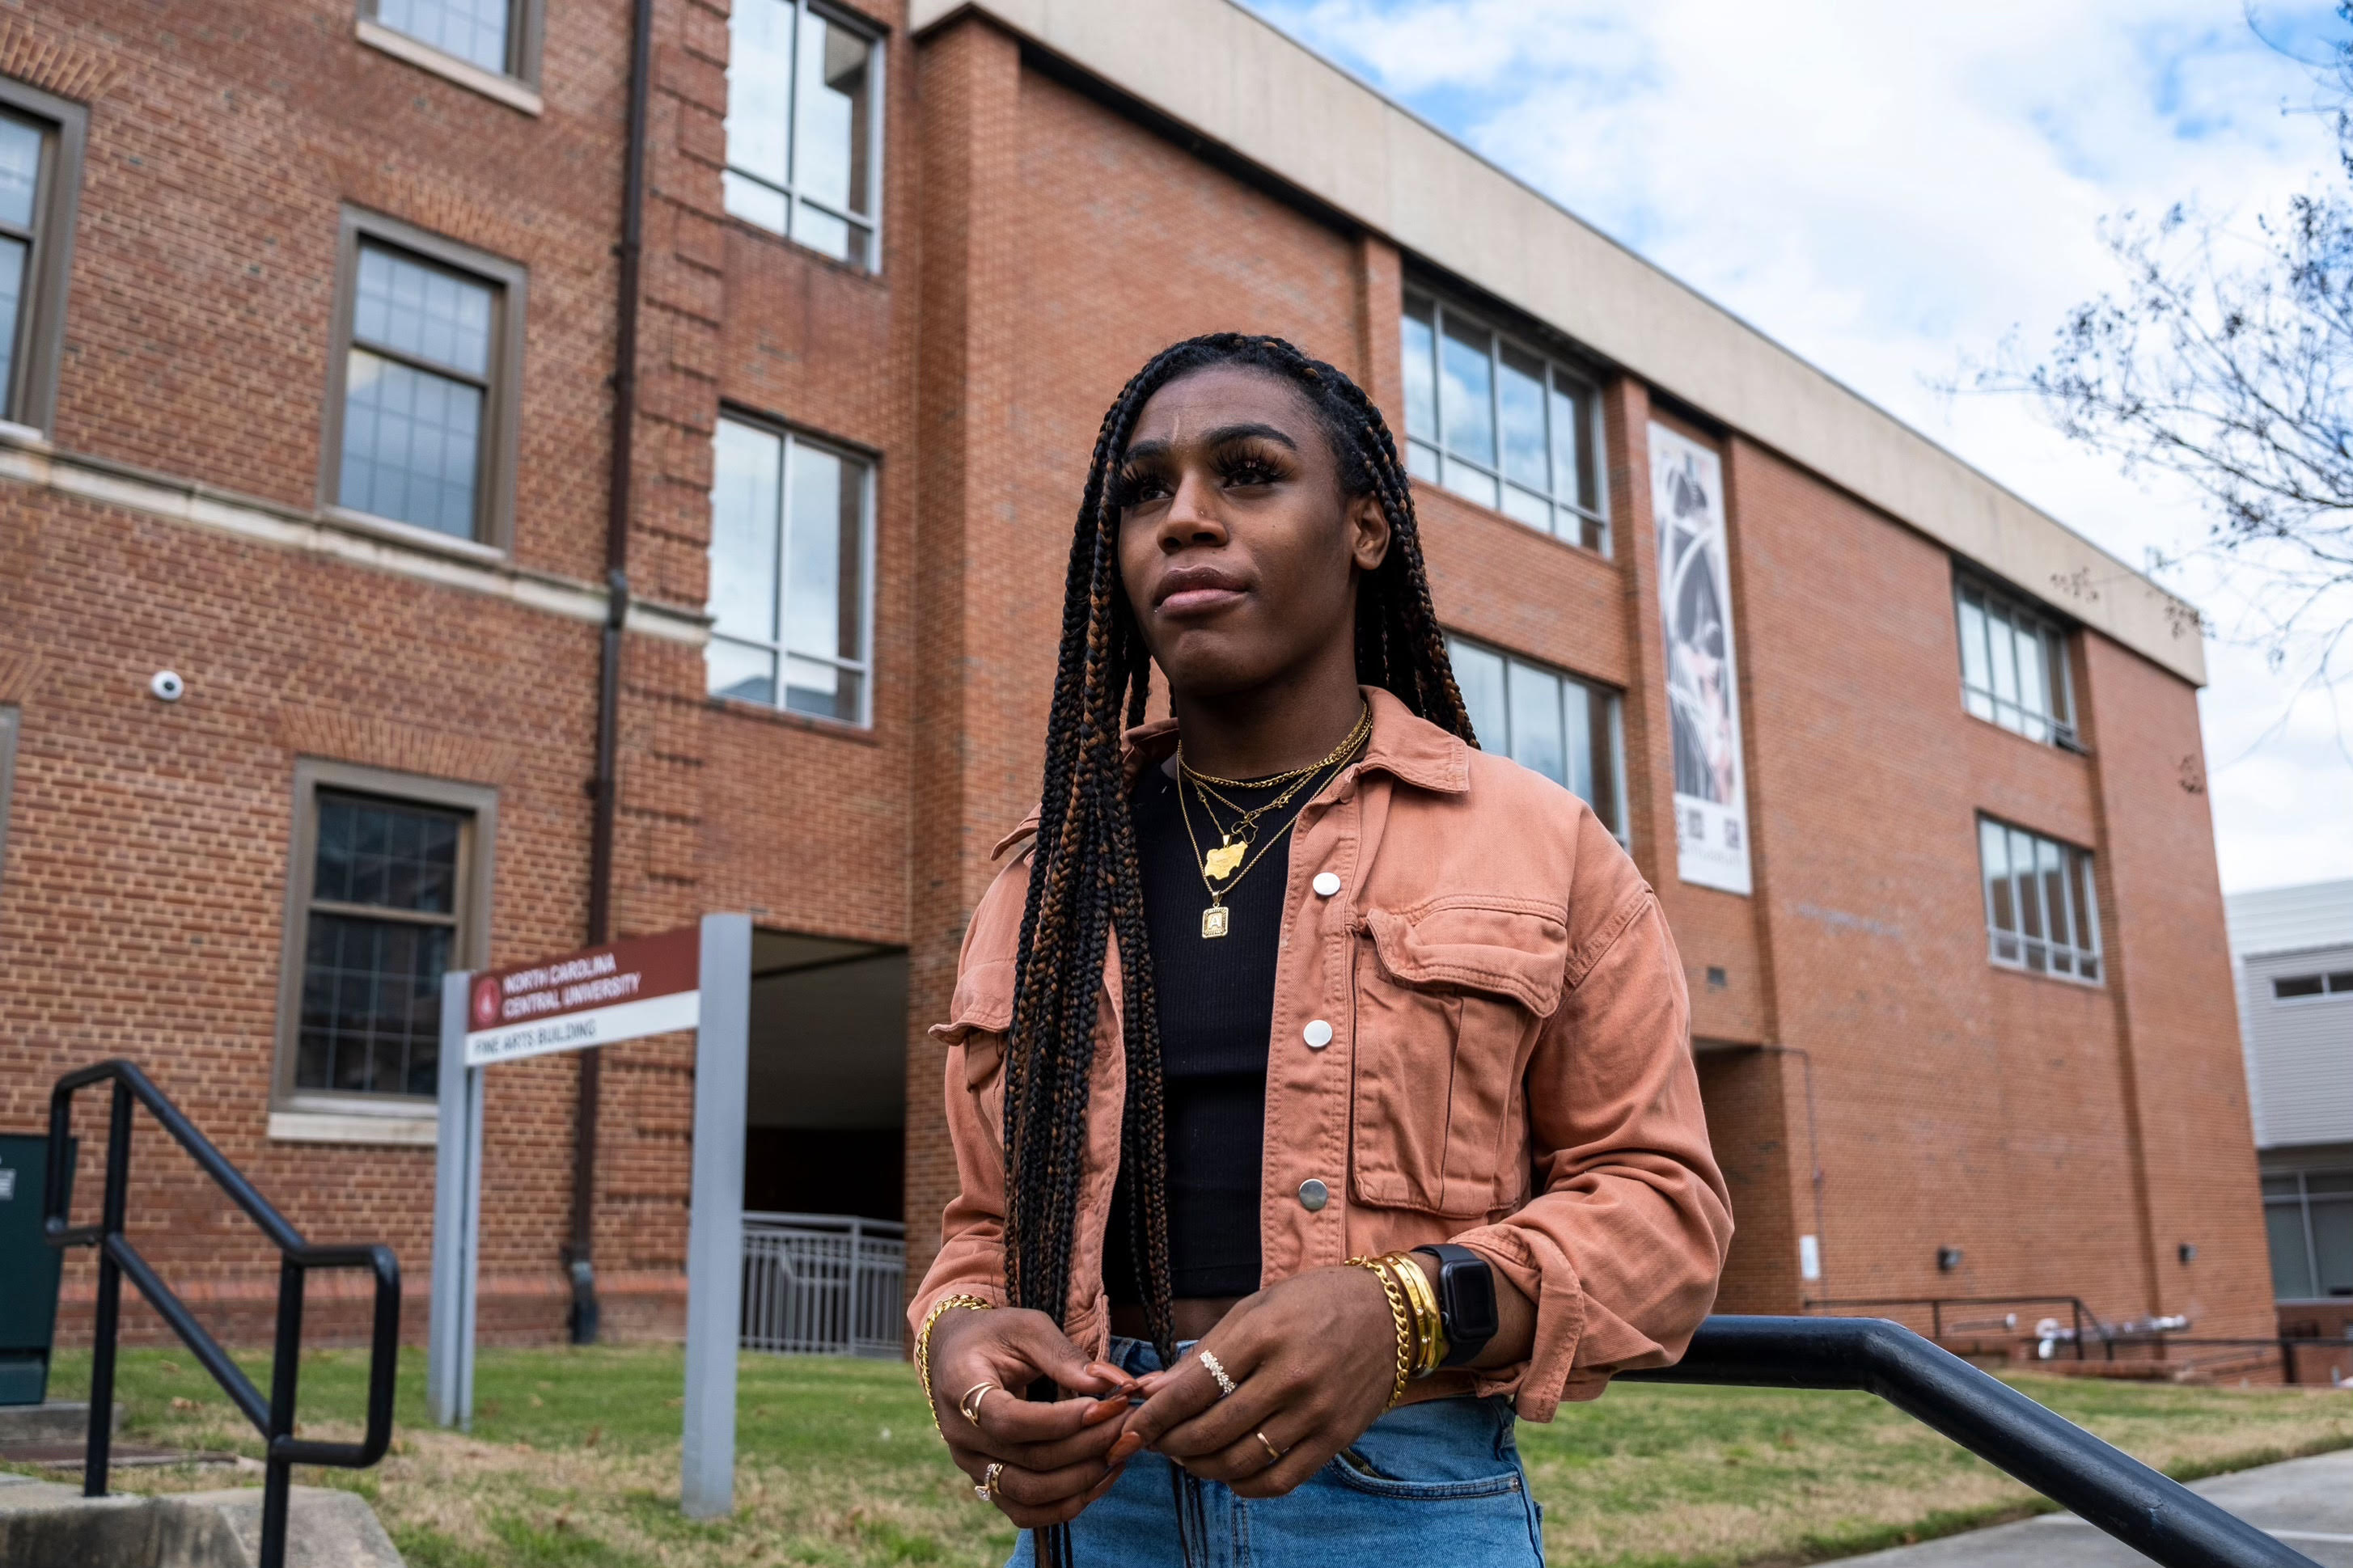 Andraya Yearwood, one of the three trans student athletes featured in Hulu's new documentary Changing The Game (Courtesy of Andraya Yearwood)